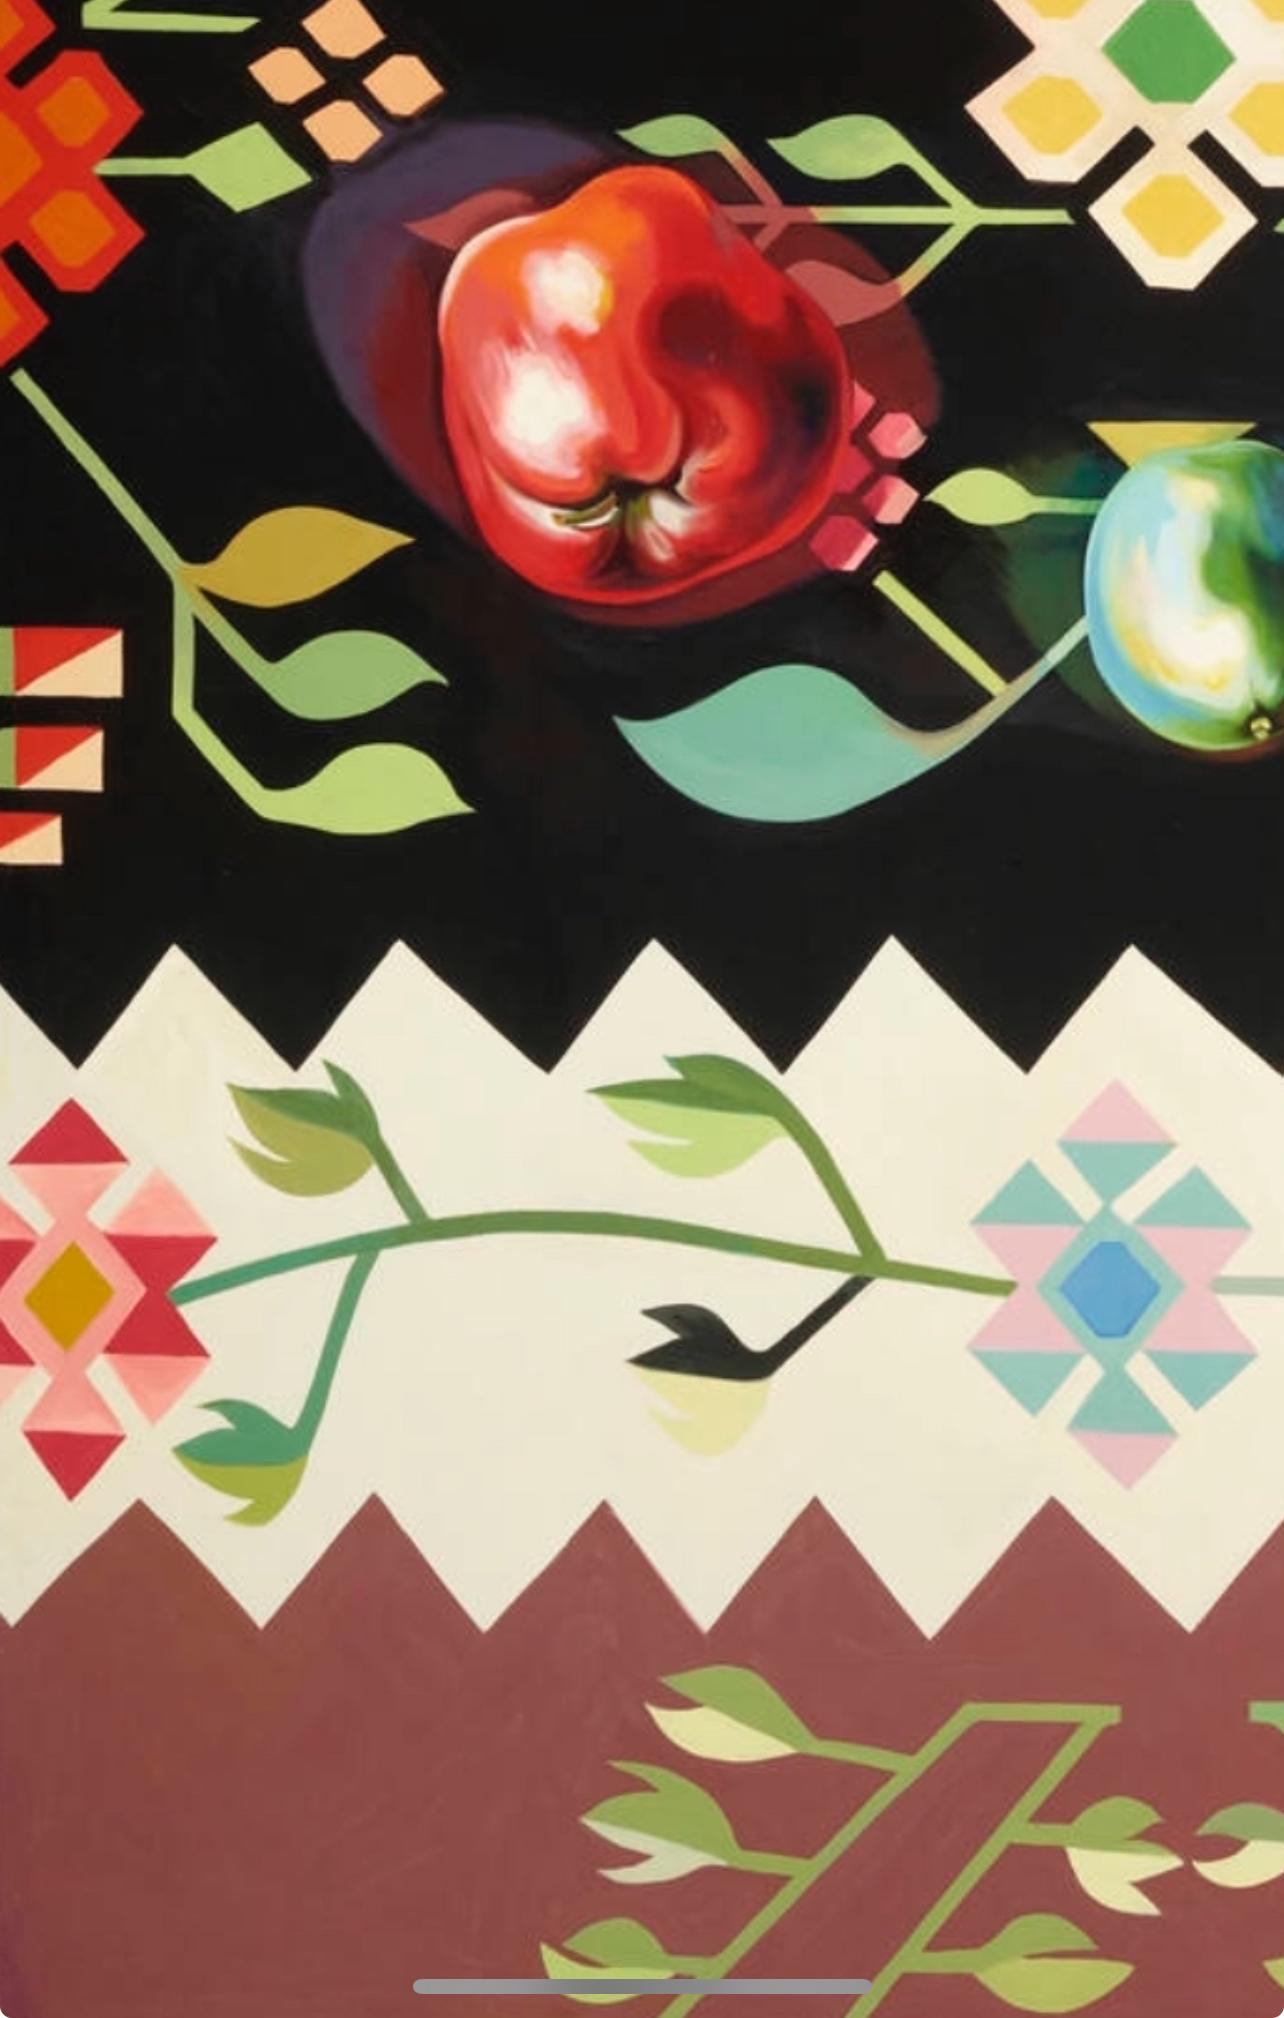 Fruit on Romanian Rug IV (100 x 80 inches), Lowell Nesbitt - Painting For Sale 4